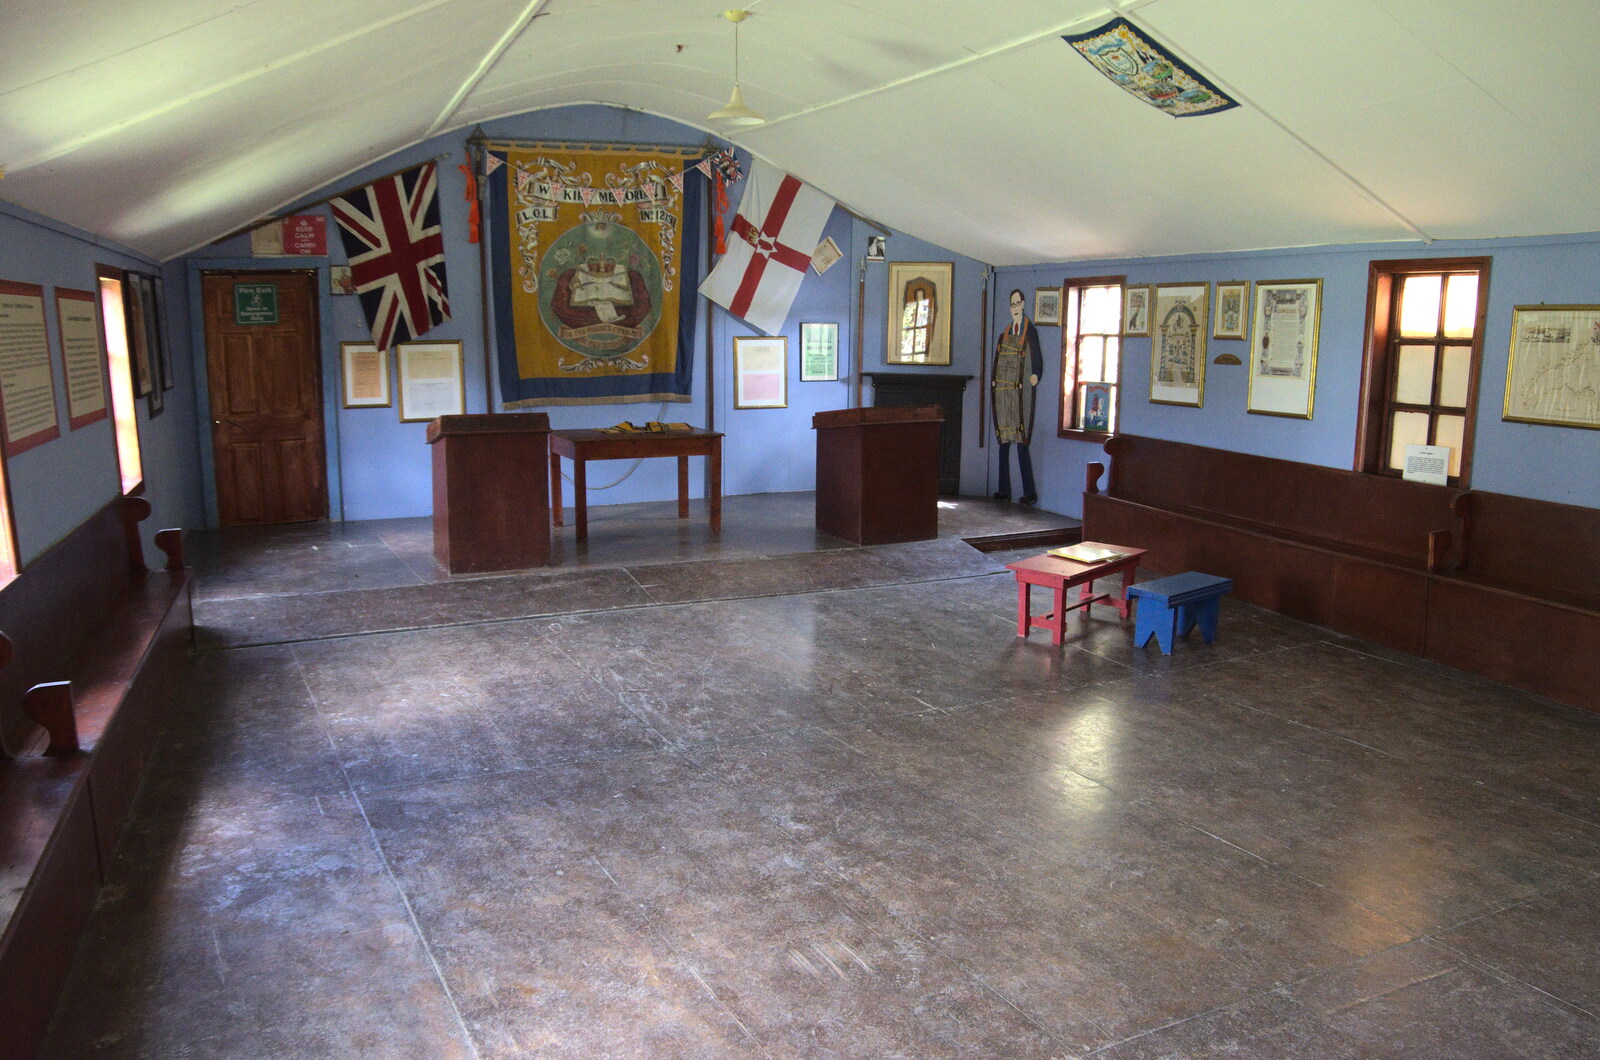 Greencastle, Doagh and Malin Head, County Donegal, Ireland - 19th April 2022: The museum has an Orange Hall recreation